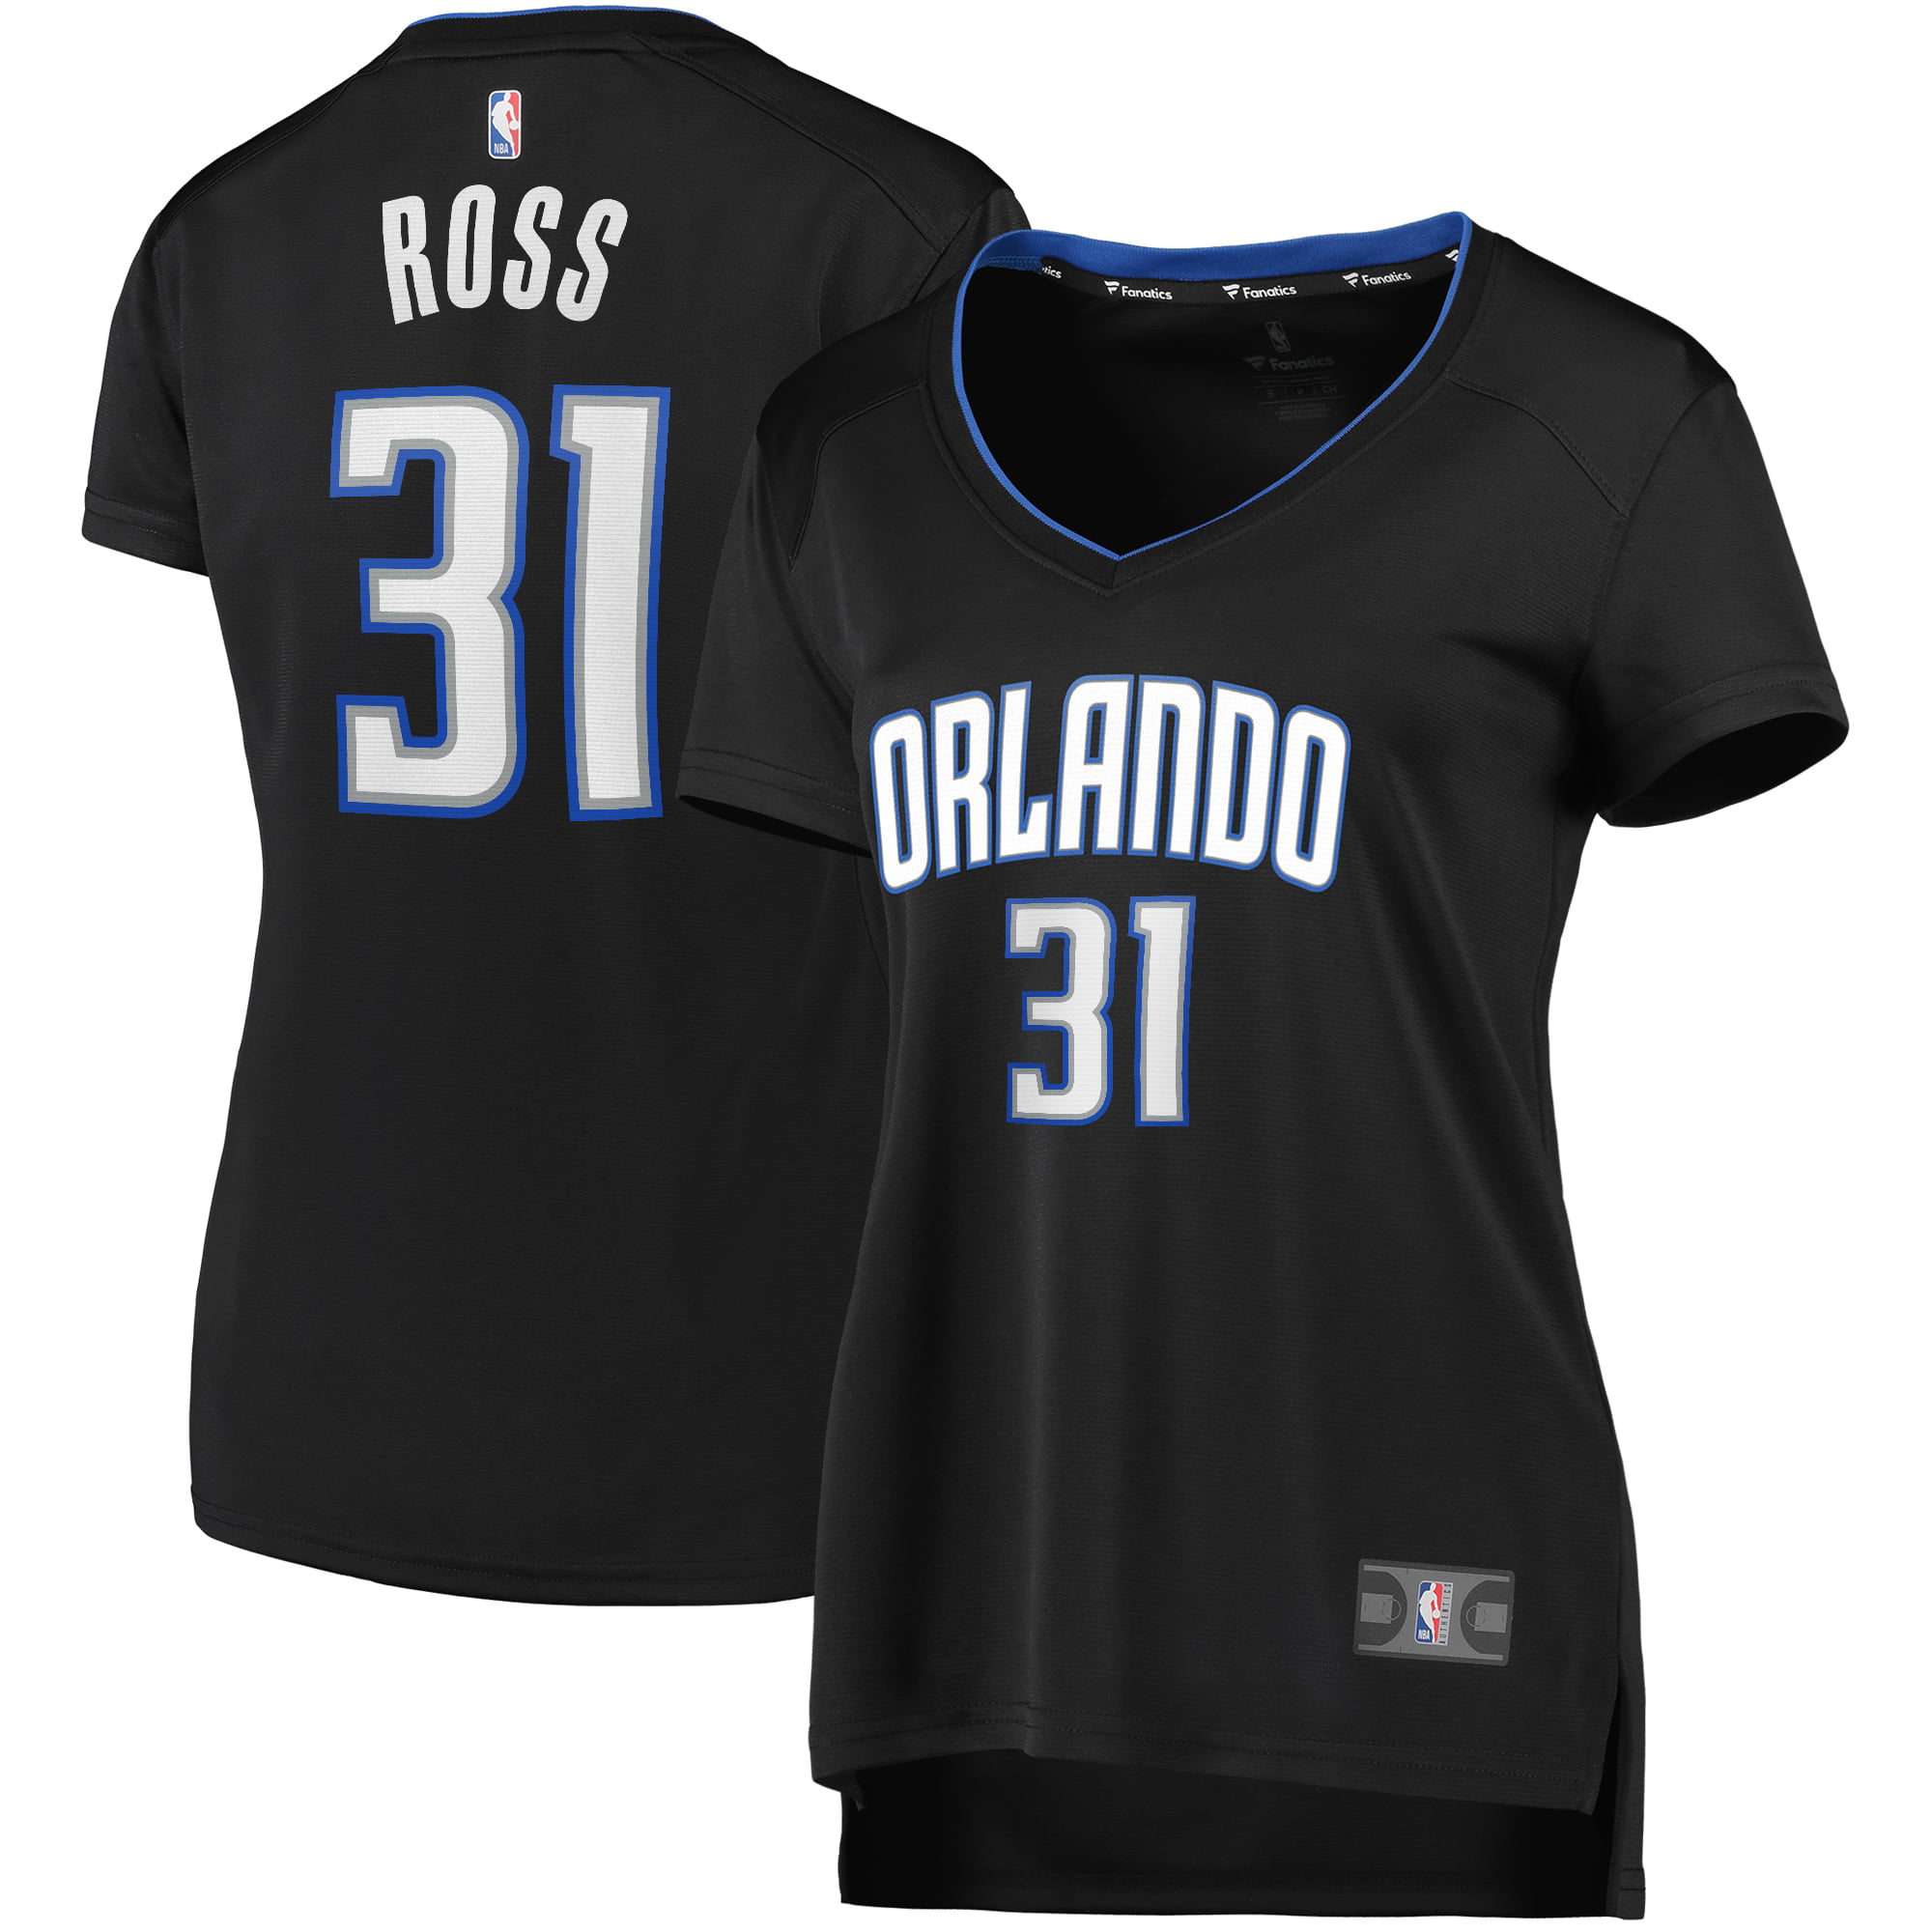 terrence ross jersey